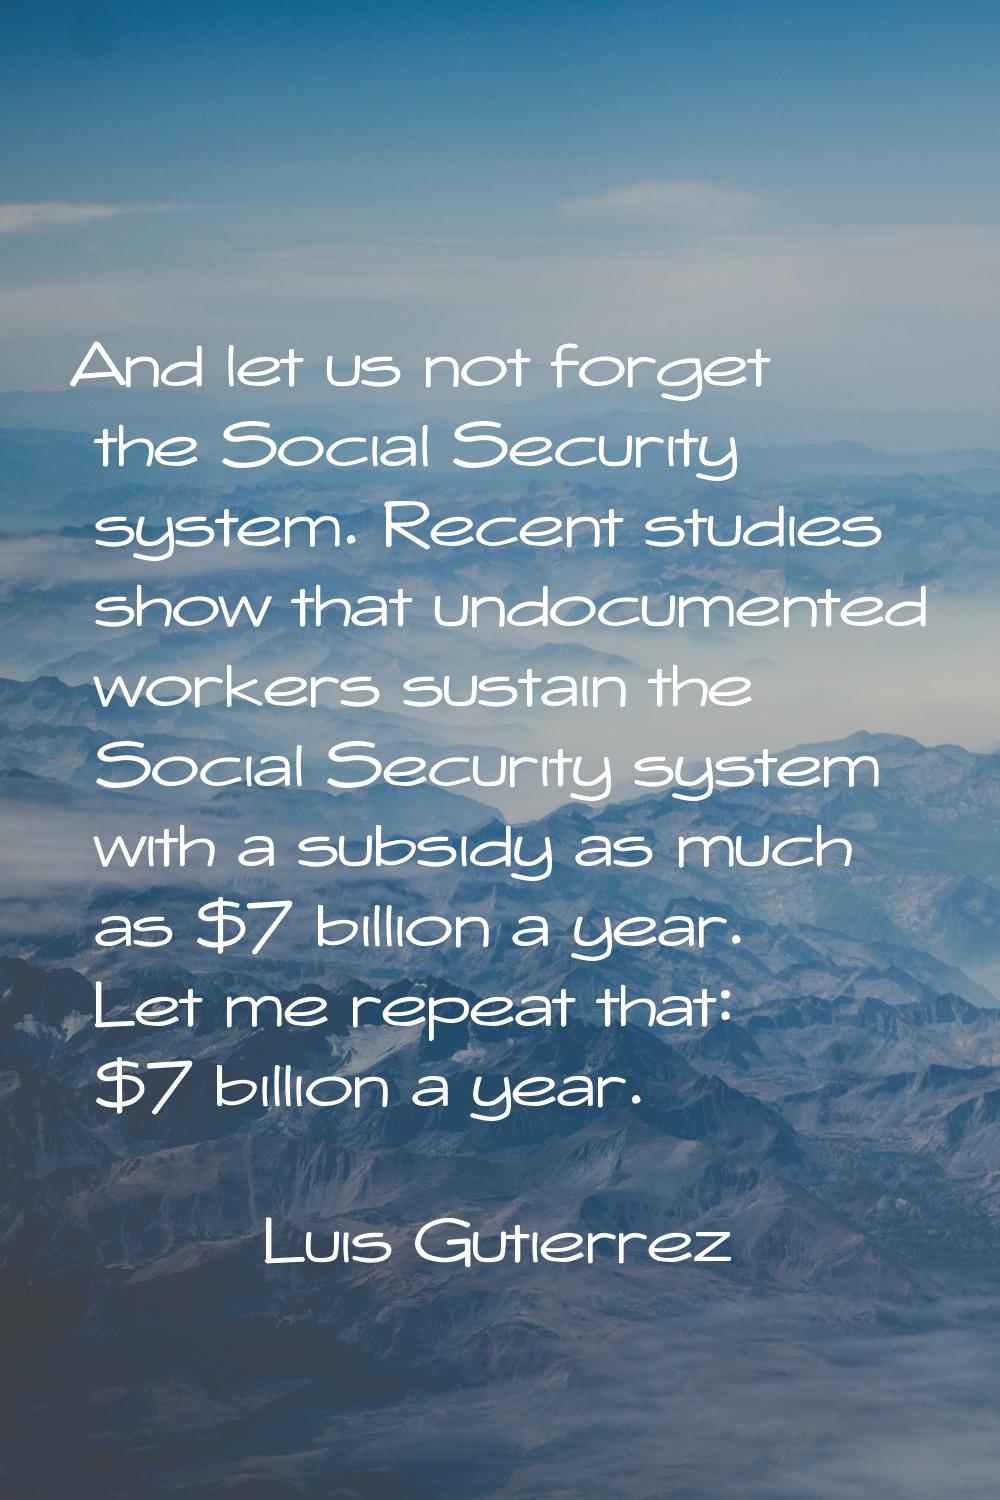 And let us not forget the Social Security system. Recent studies show that undocumented workers sus